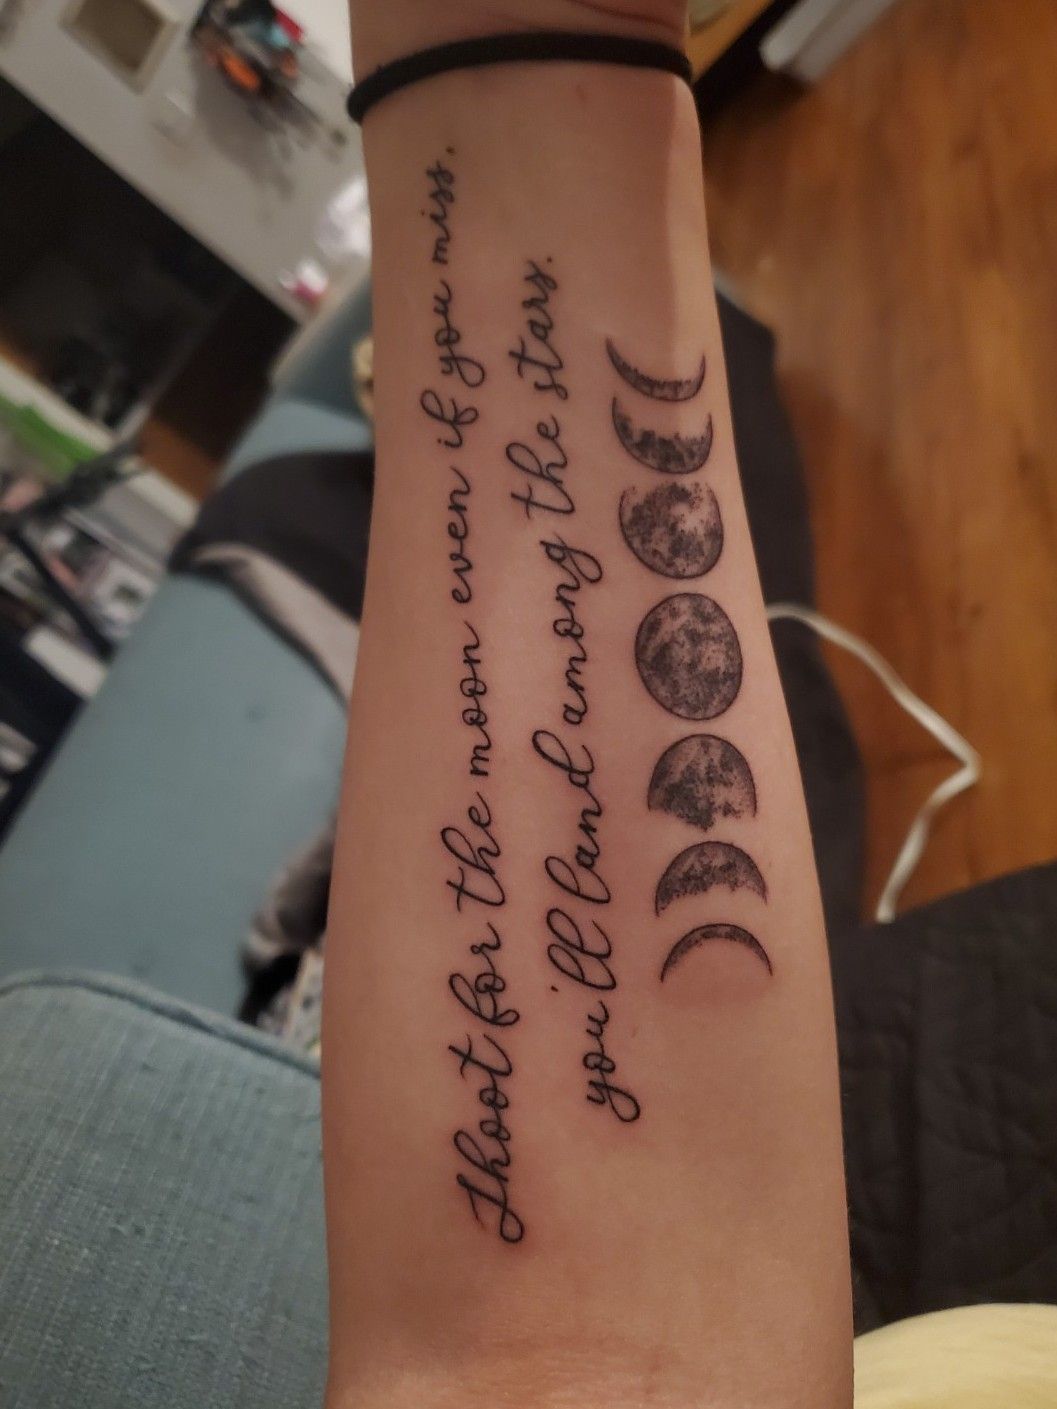 which is more readable and acceptable as a tattoo and is this at all  offensive  rsanskrit